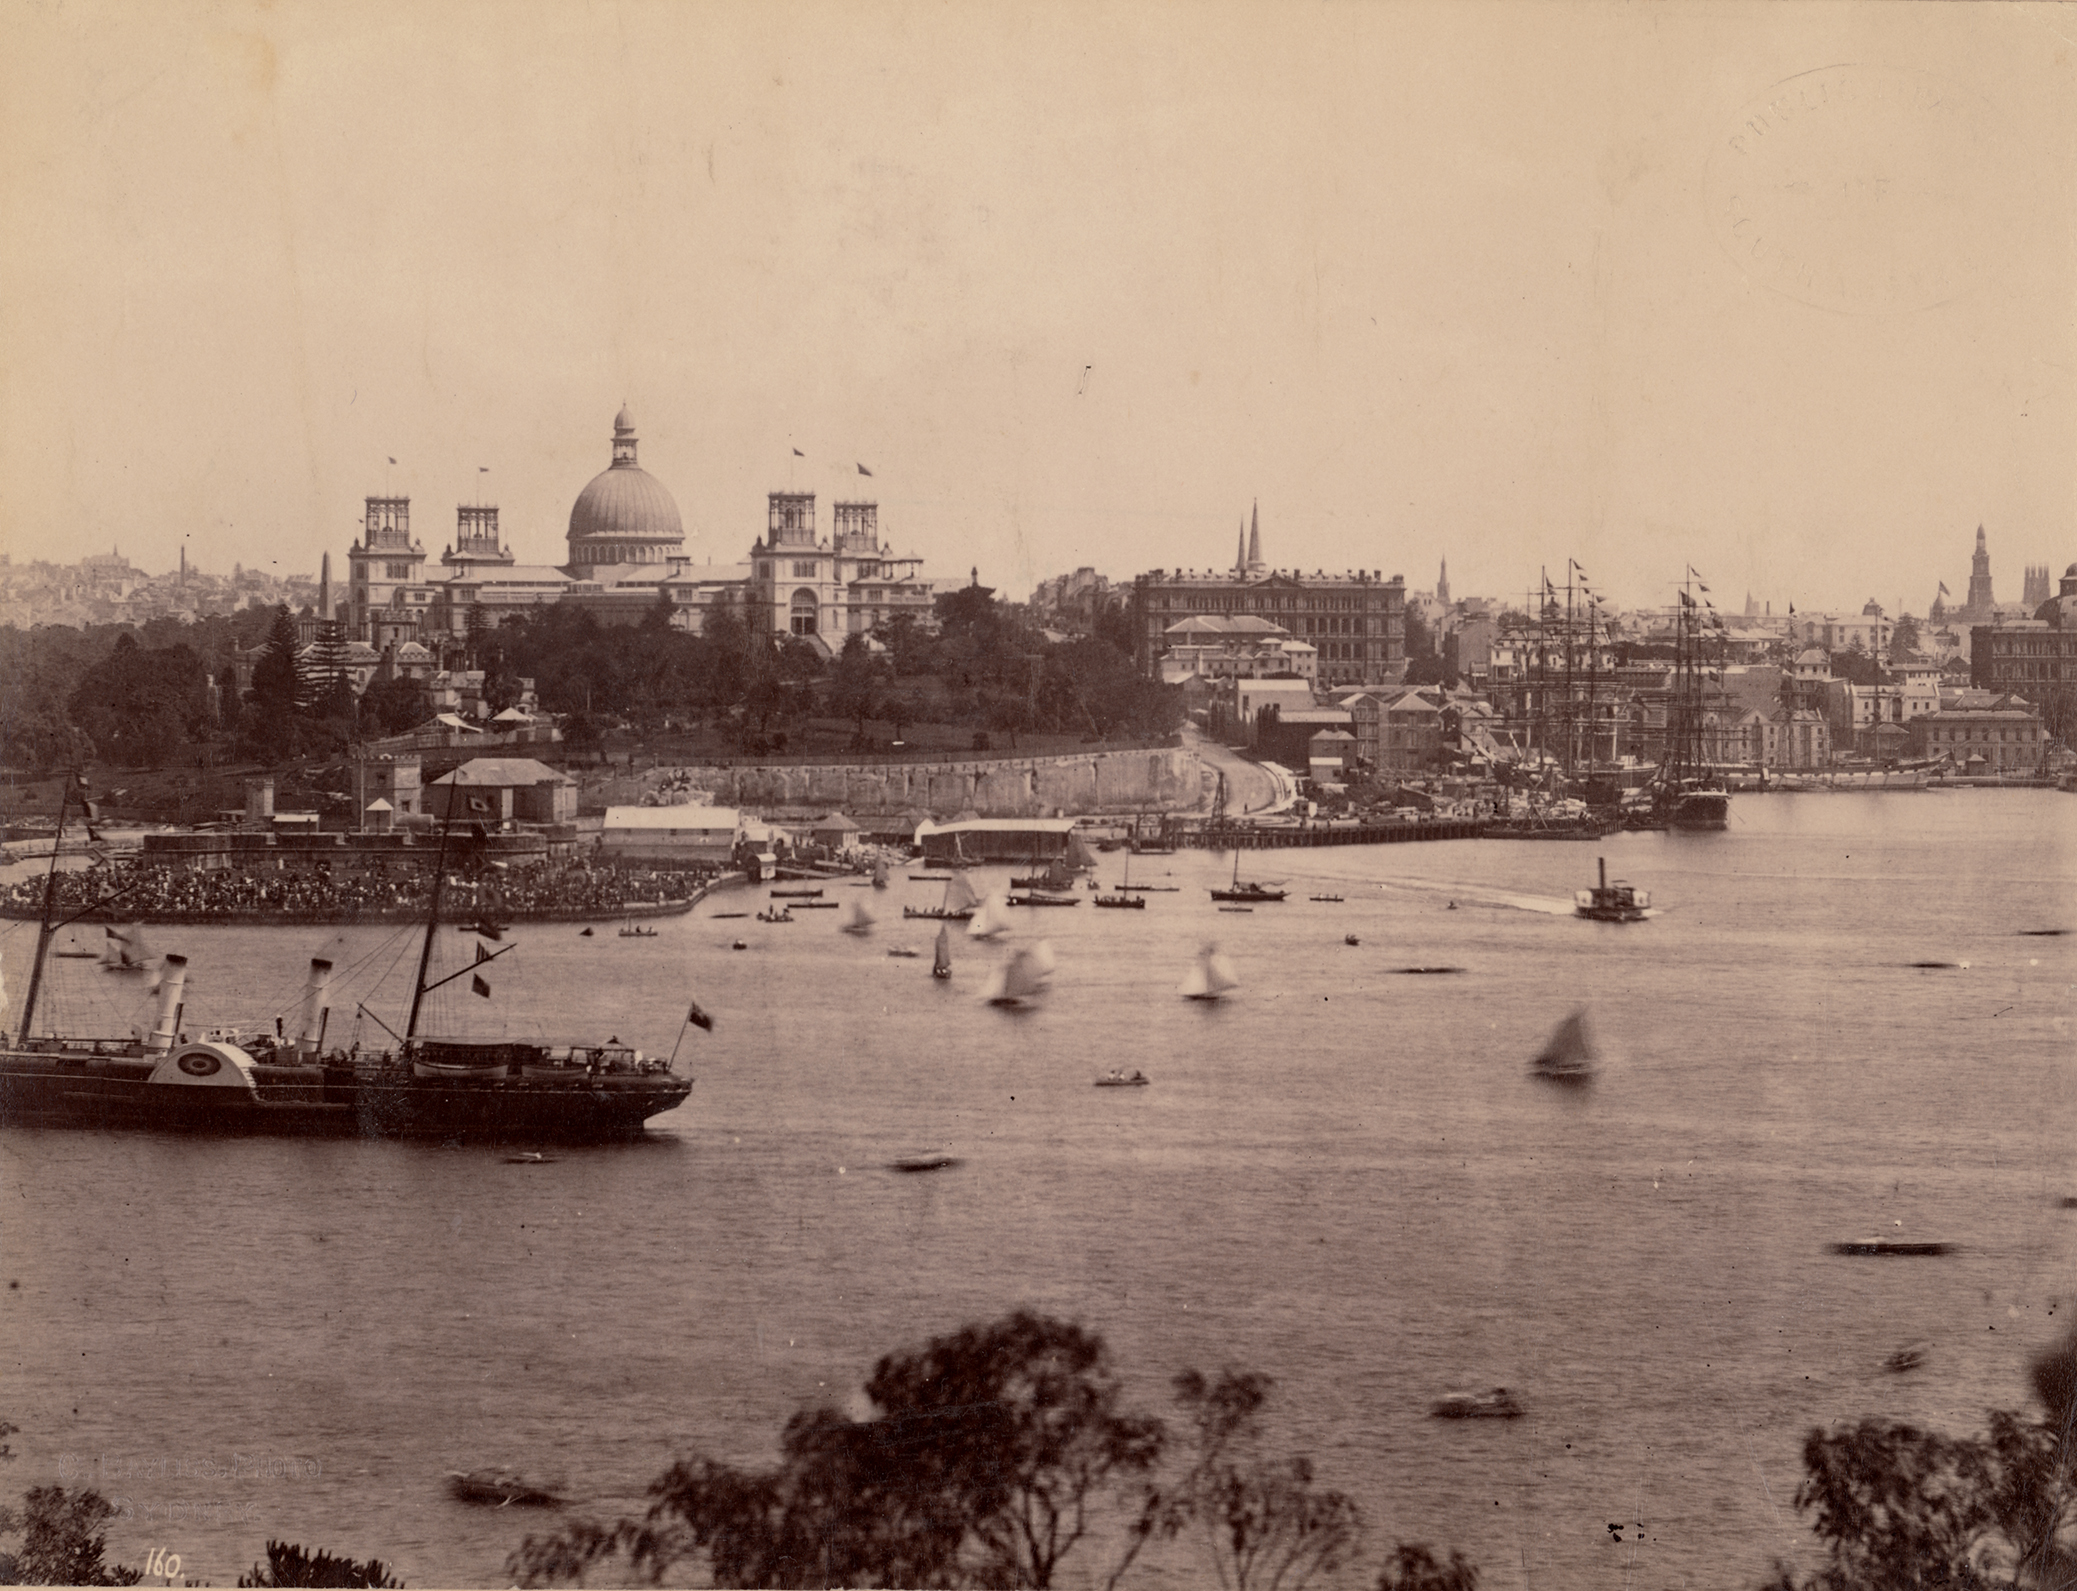 A sepia photograph of the Garden Palace taken from the north side of Sydney Harbour looking back across the harbour with tall ships in Circular Quay